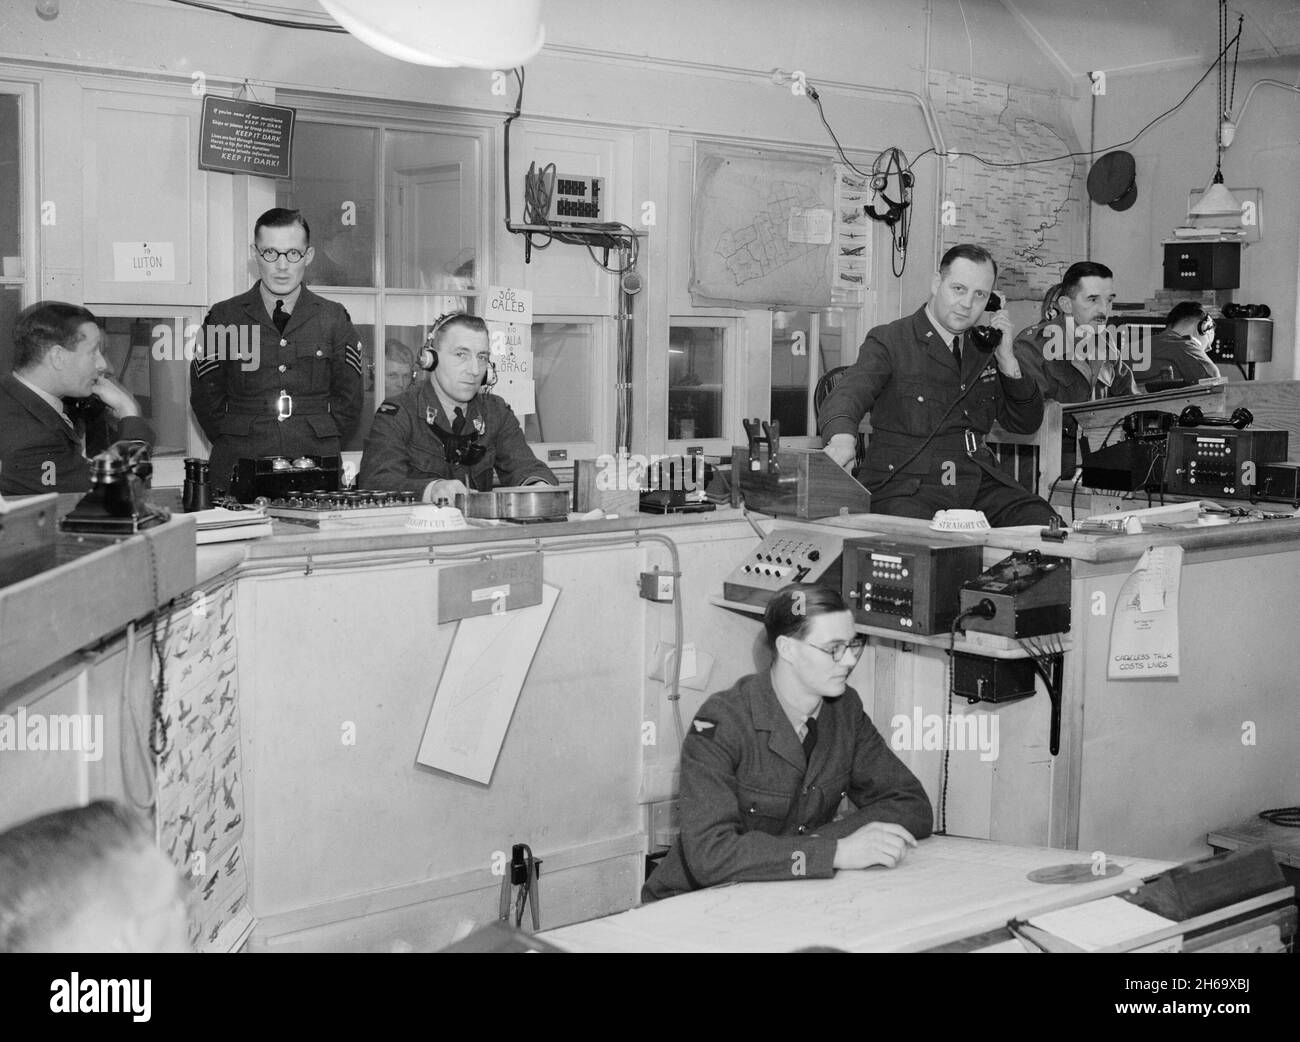 RAF DUXFORD, CAMBRIDGESHIRE, UK - September 1940 - RAF Fighter Command's Sector G Operations Room at Duxford, Cambridgeshire, September 1940. The call Stock Photo